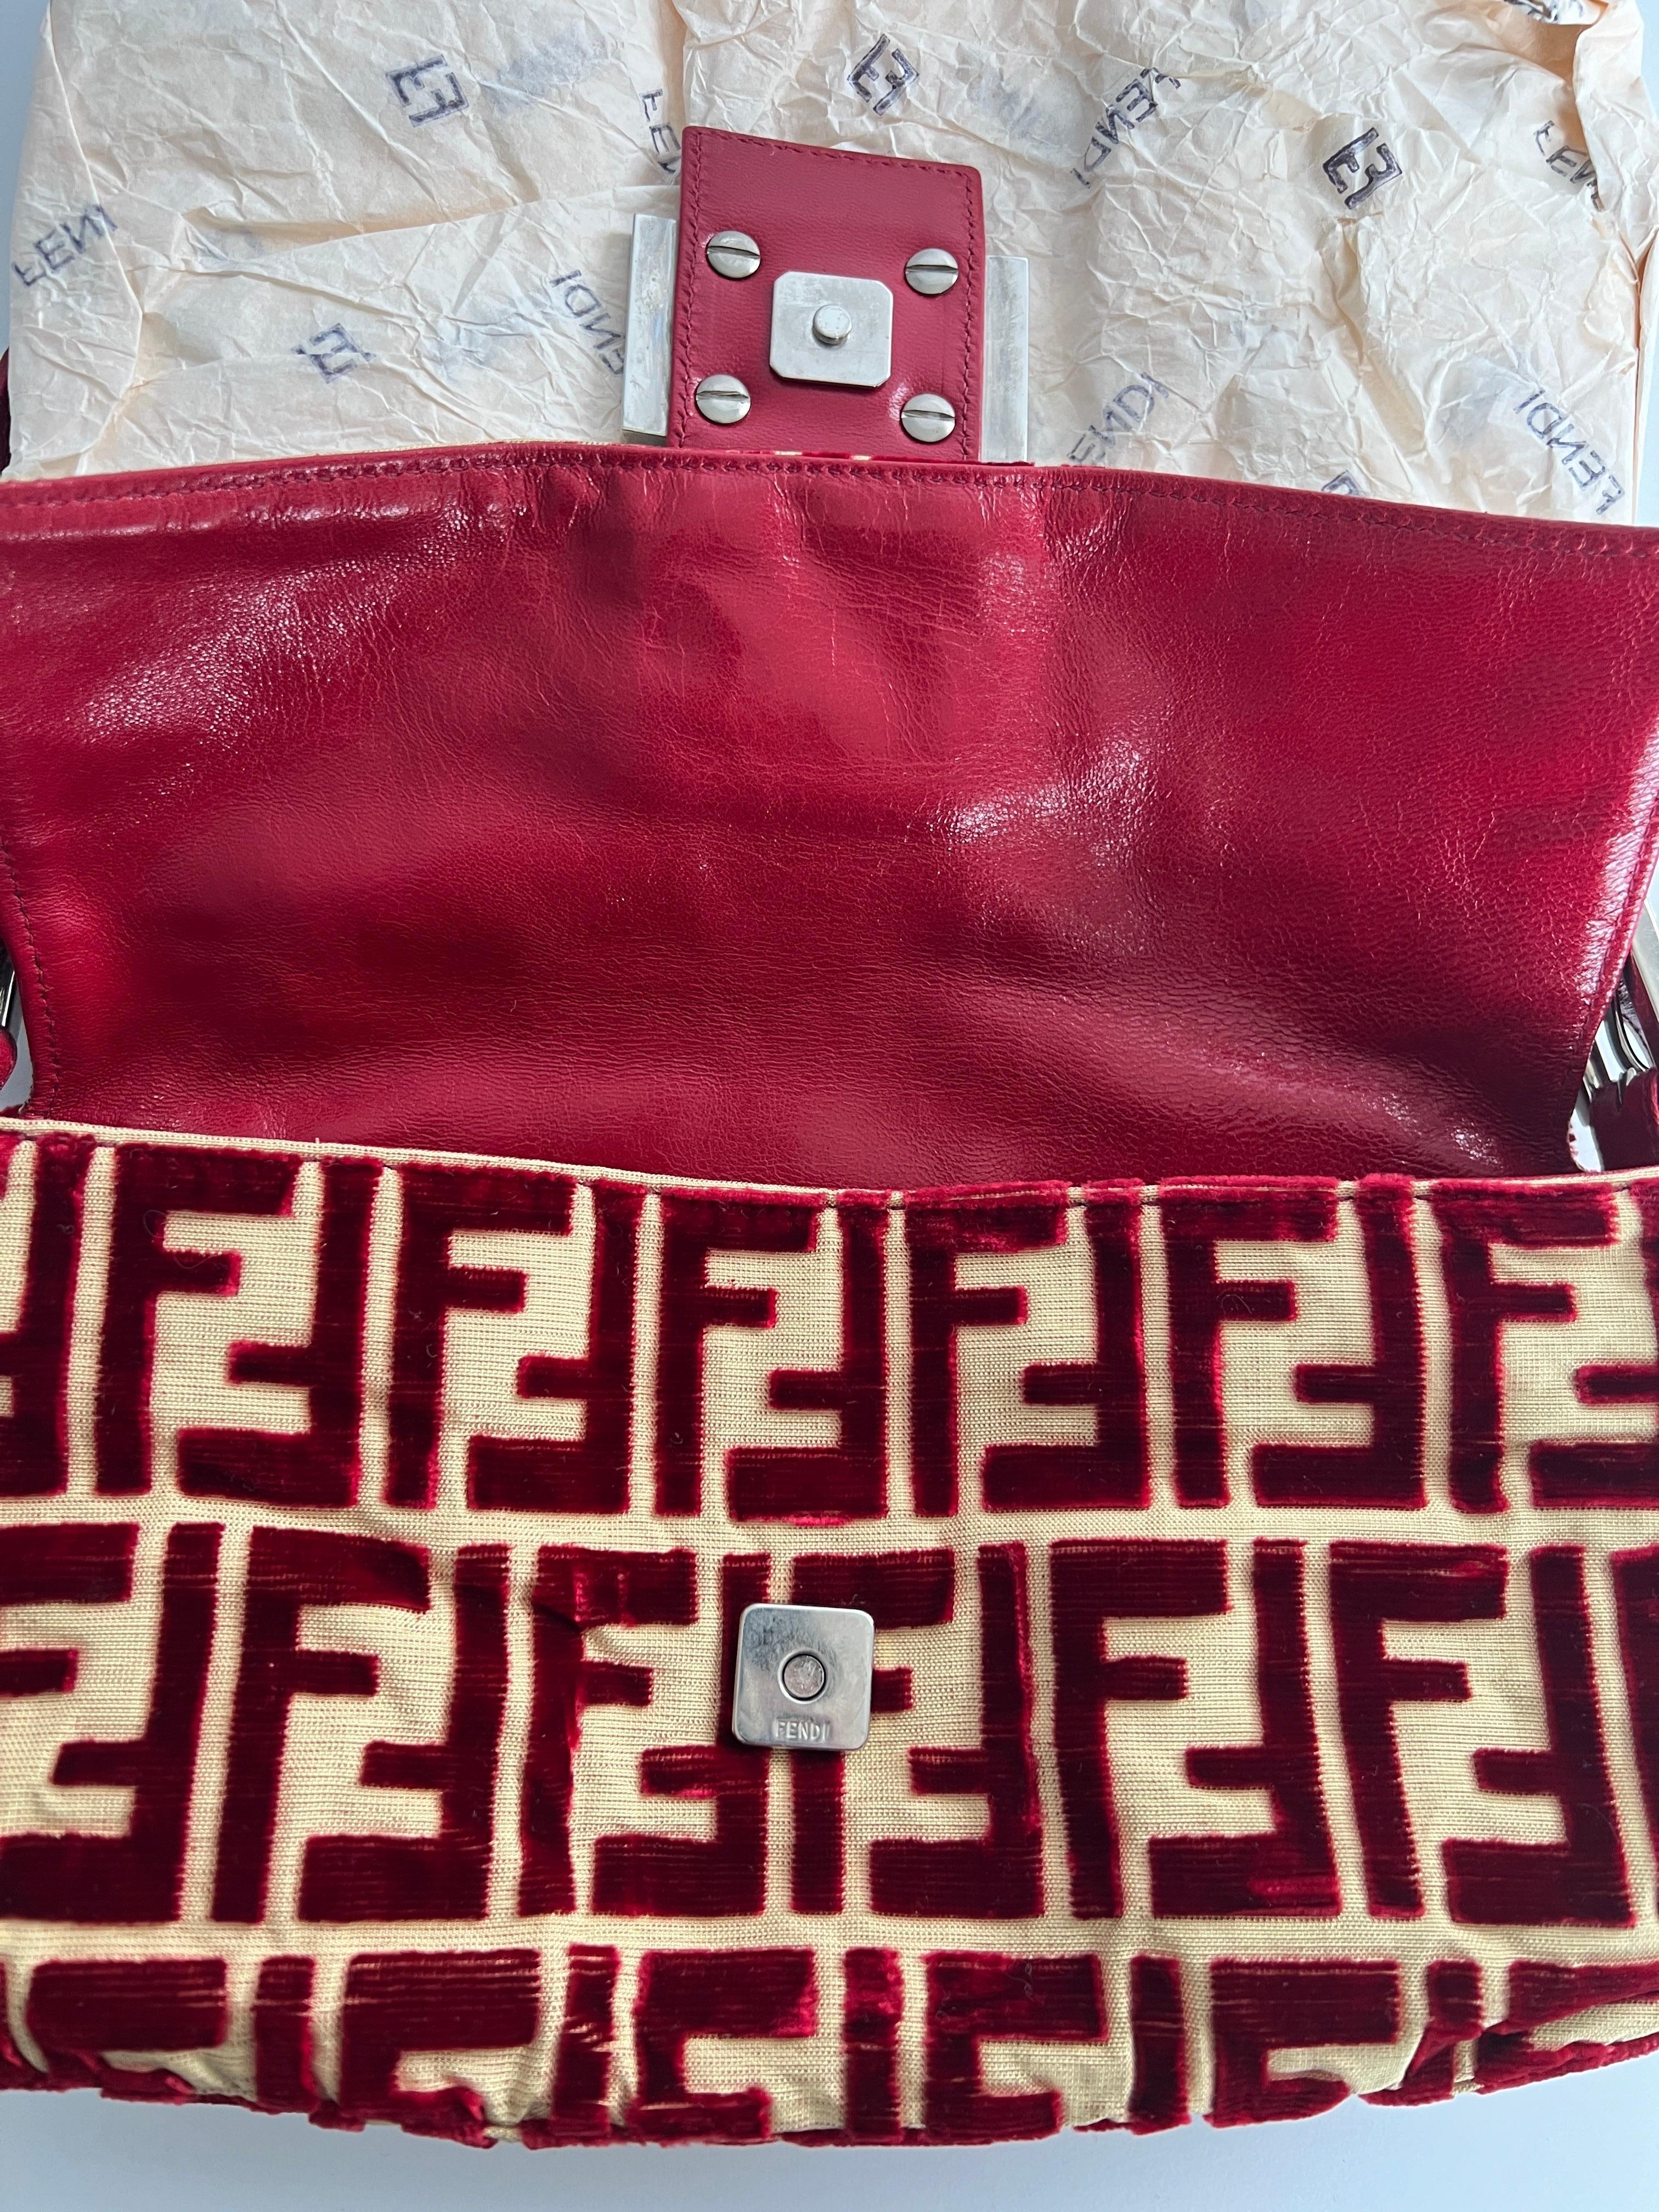 Extremely rare Fendi red velvet baguette by Lisio 2